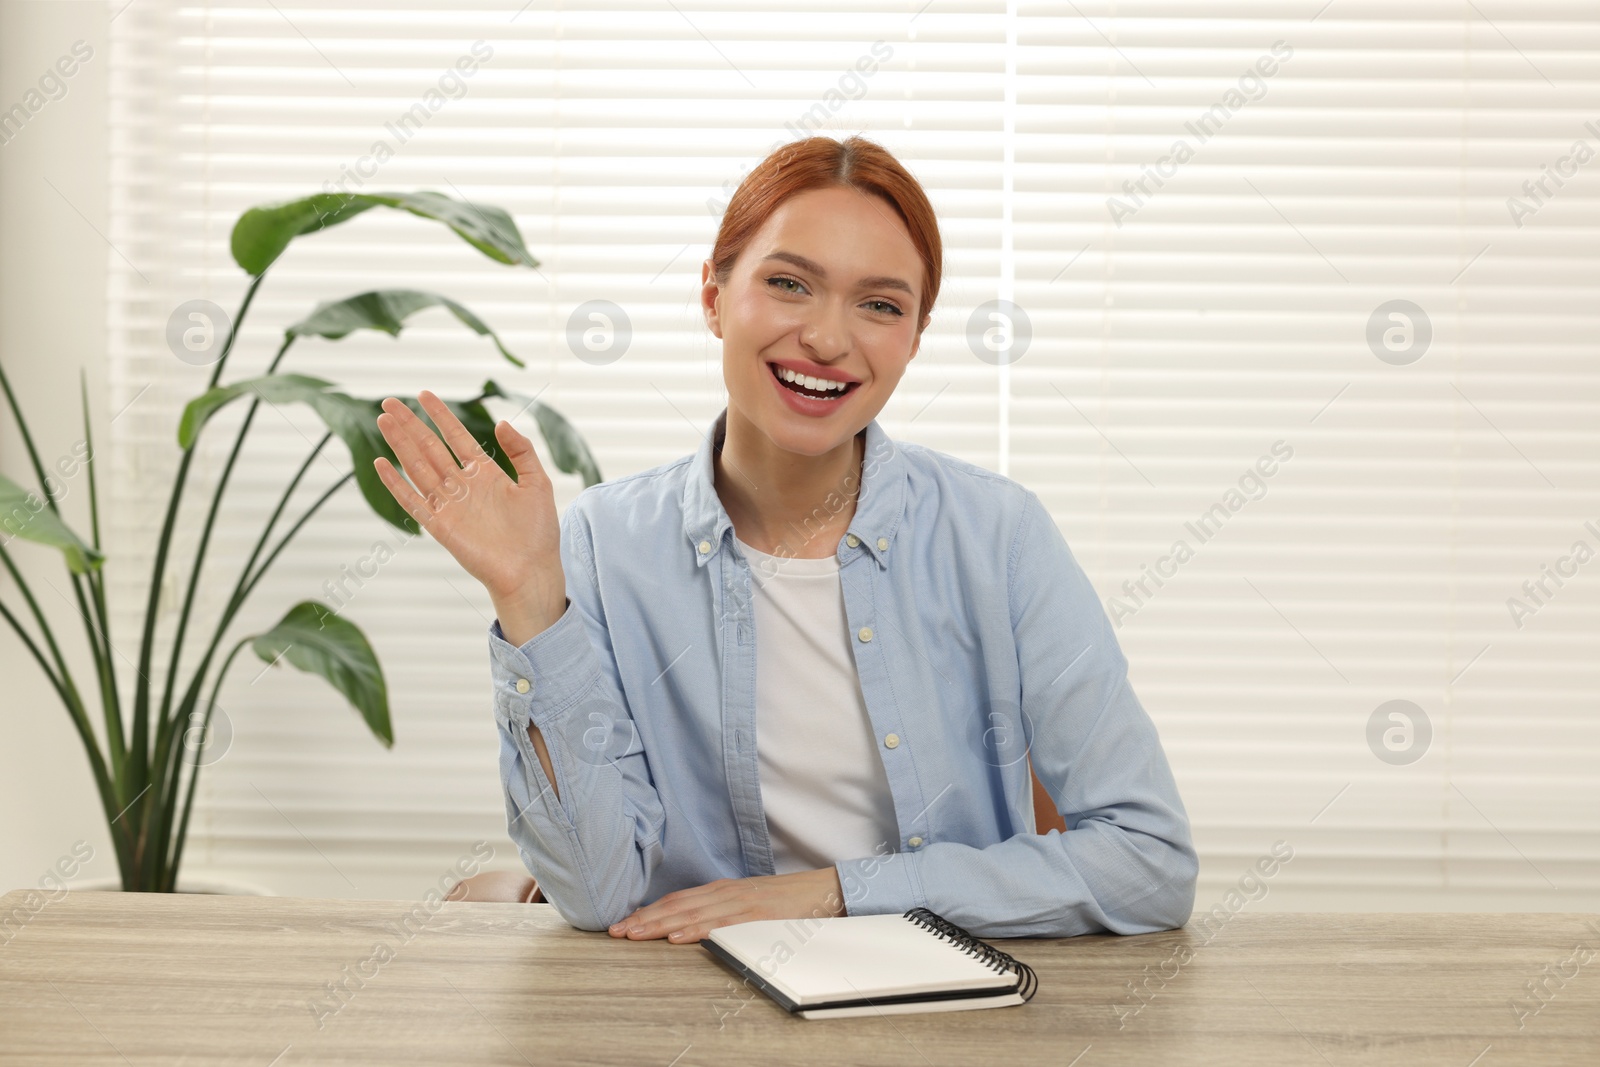 Photo of Young woman waving hello during video chat at wooden table indoors, view from web camera